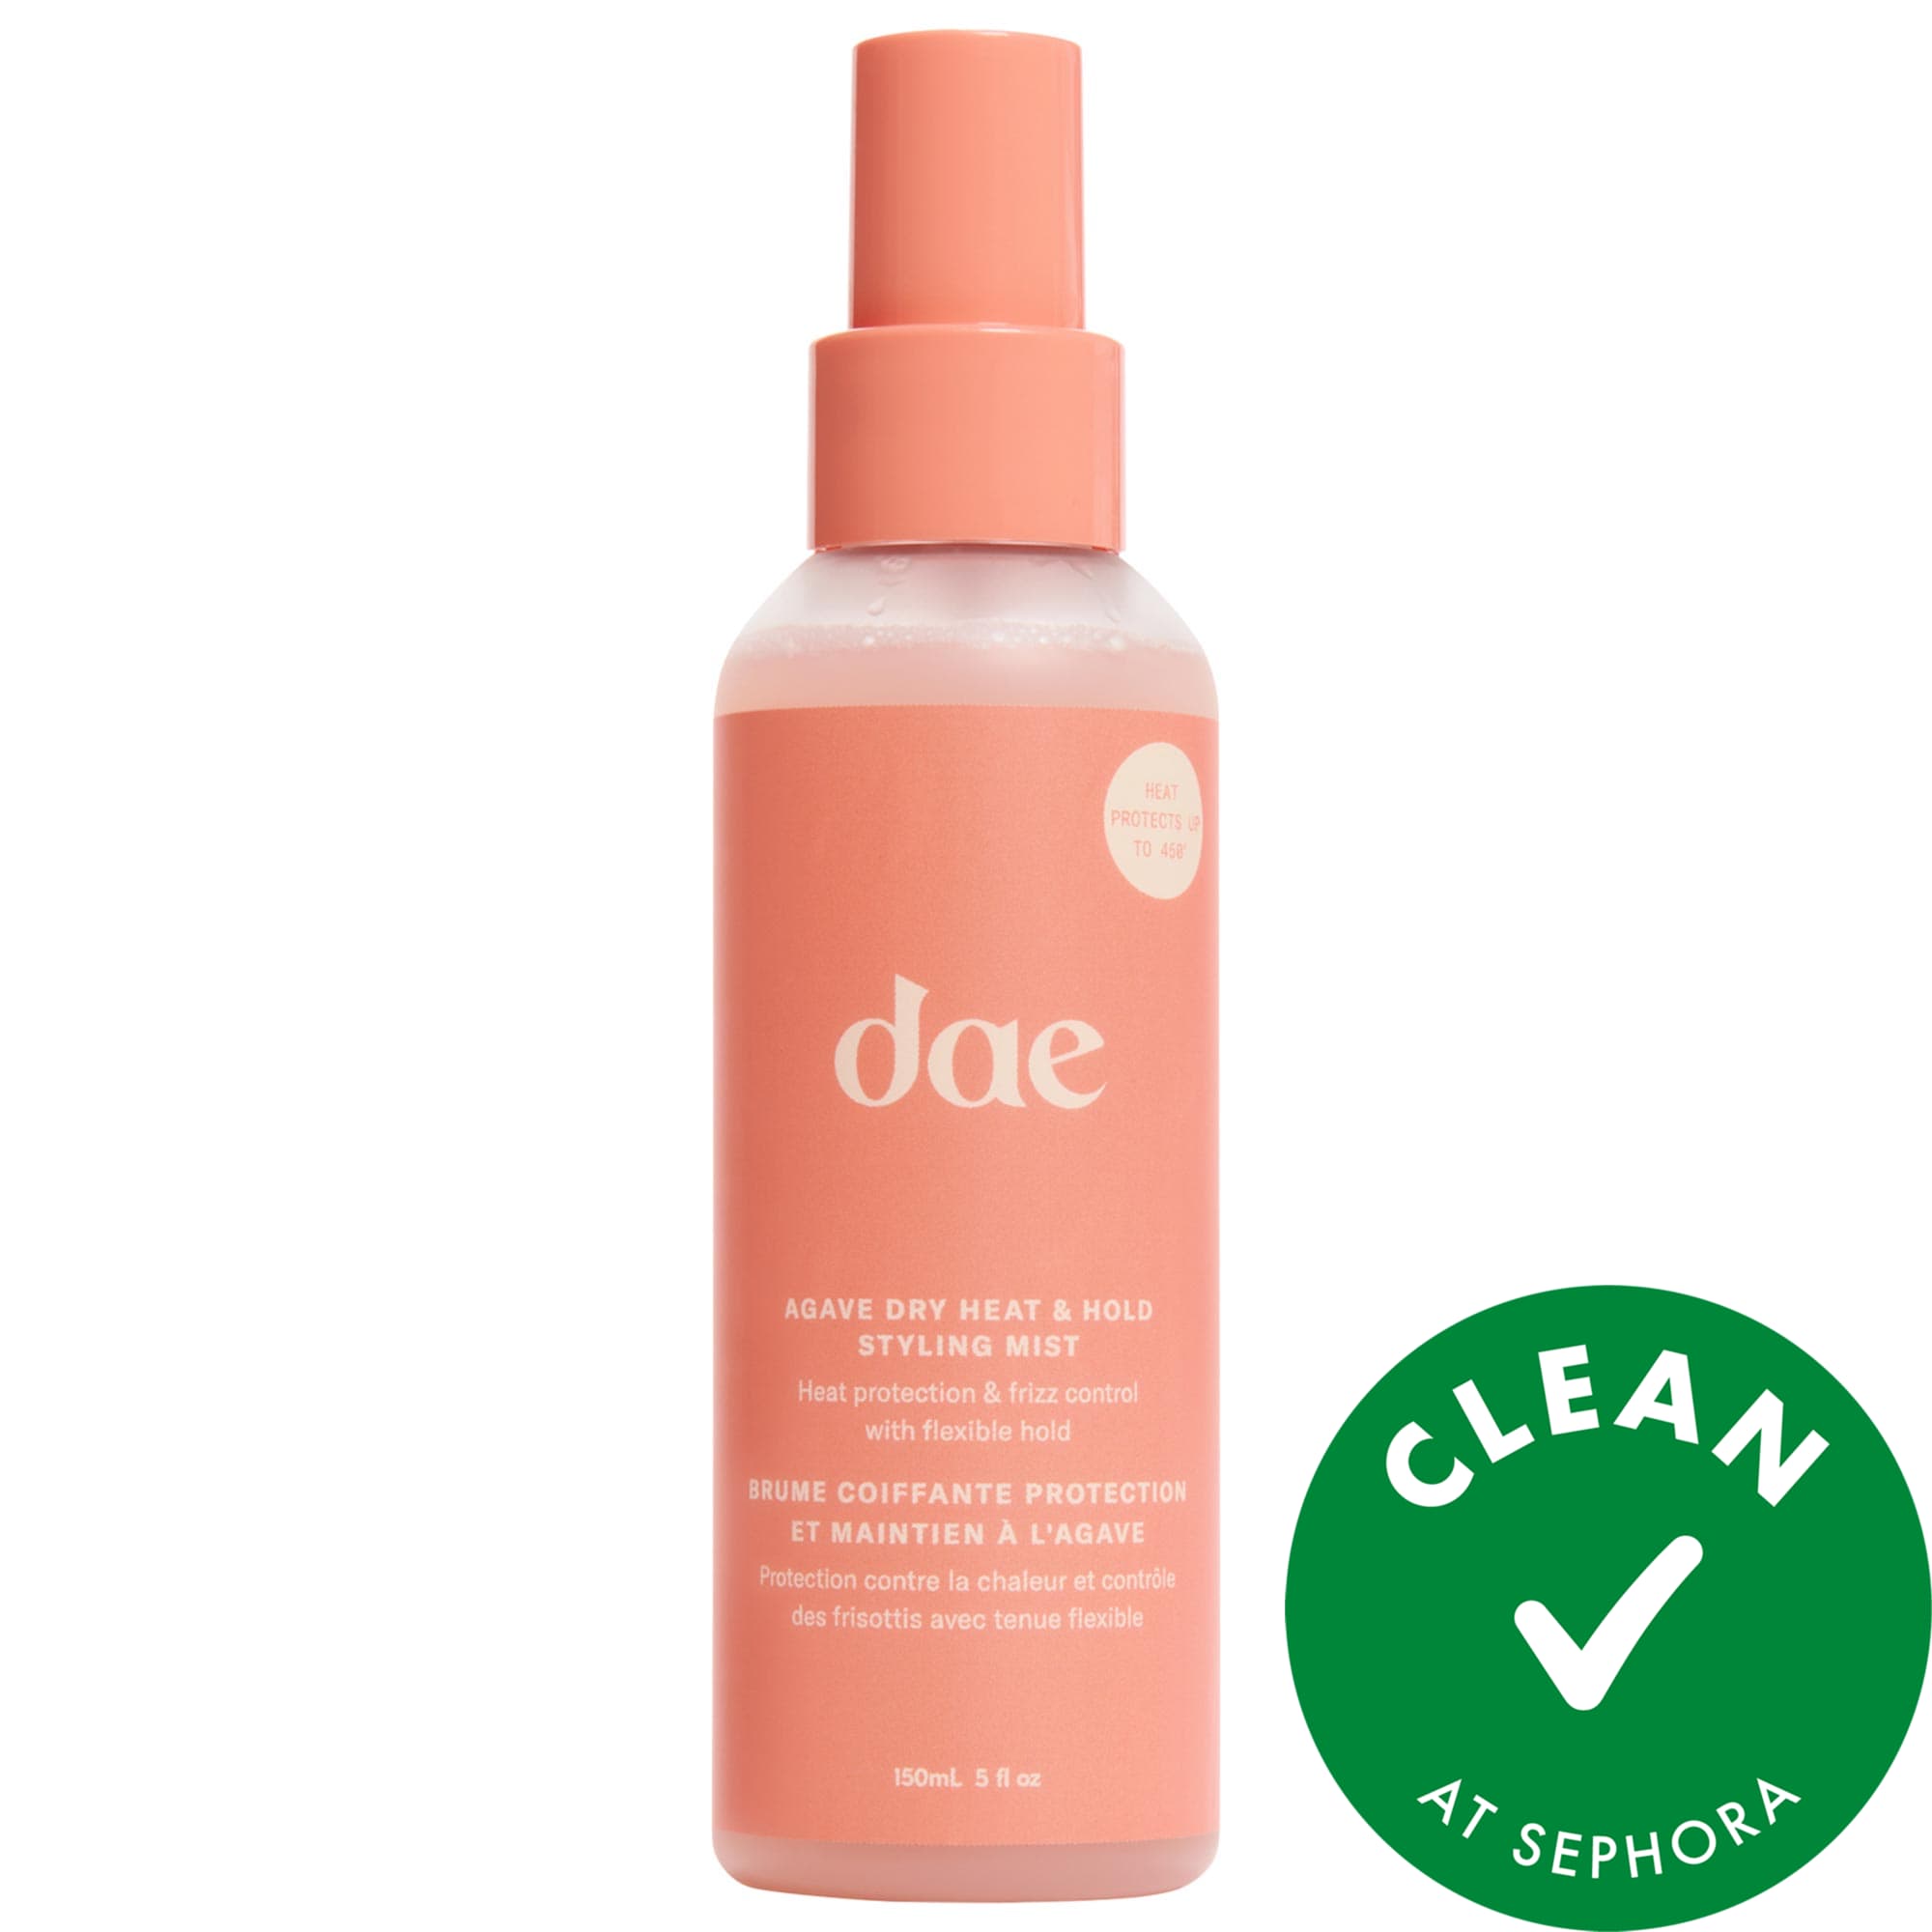 Agave Dry Heat Protection & Hold Styling Mist Dae